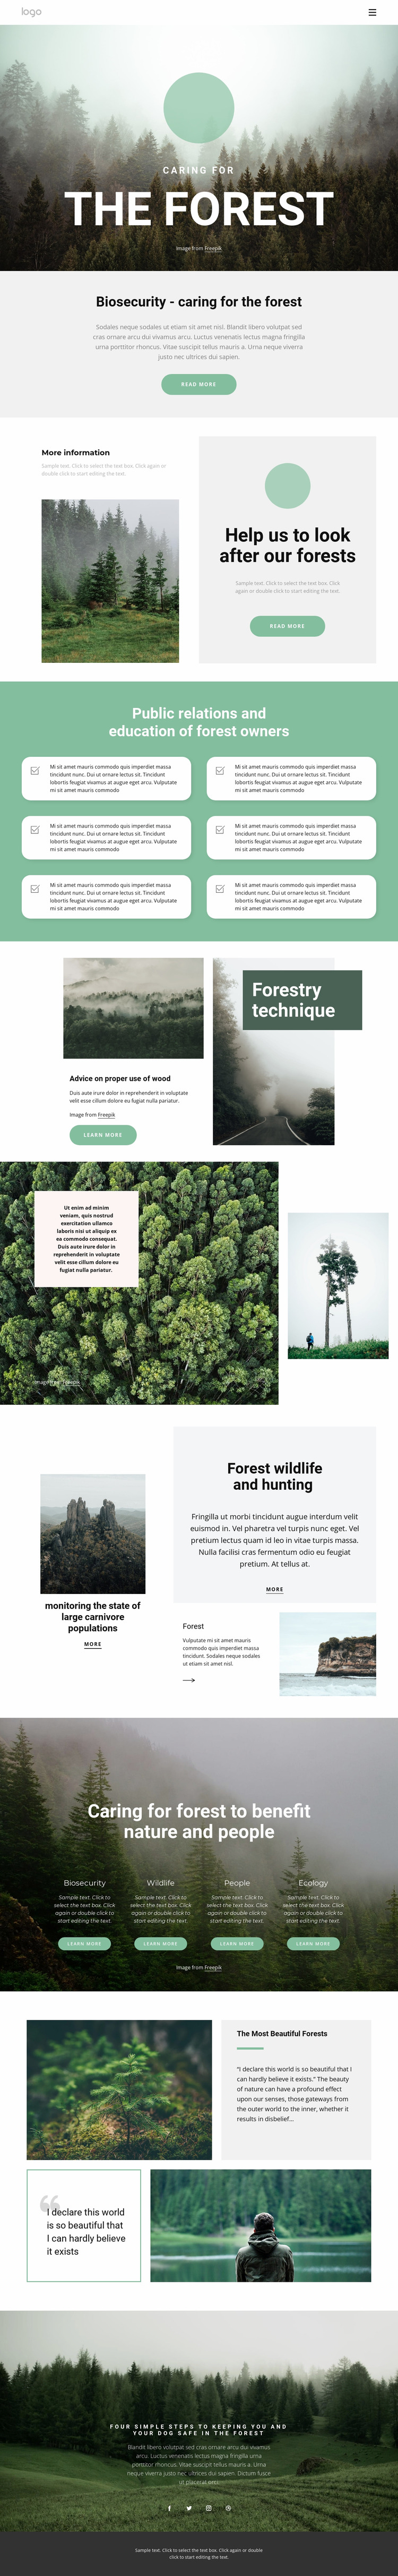 Caring for parks and forests Html Website Builder